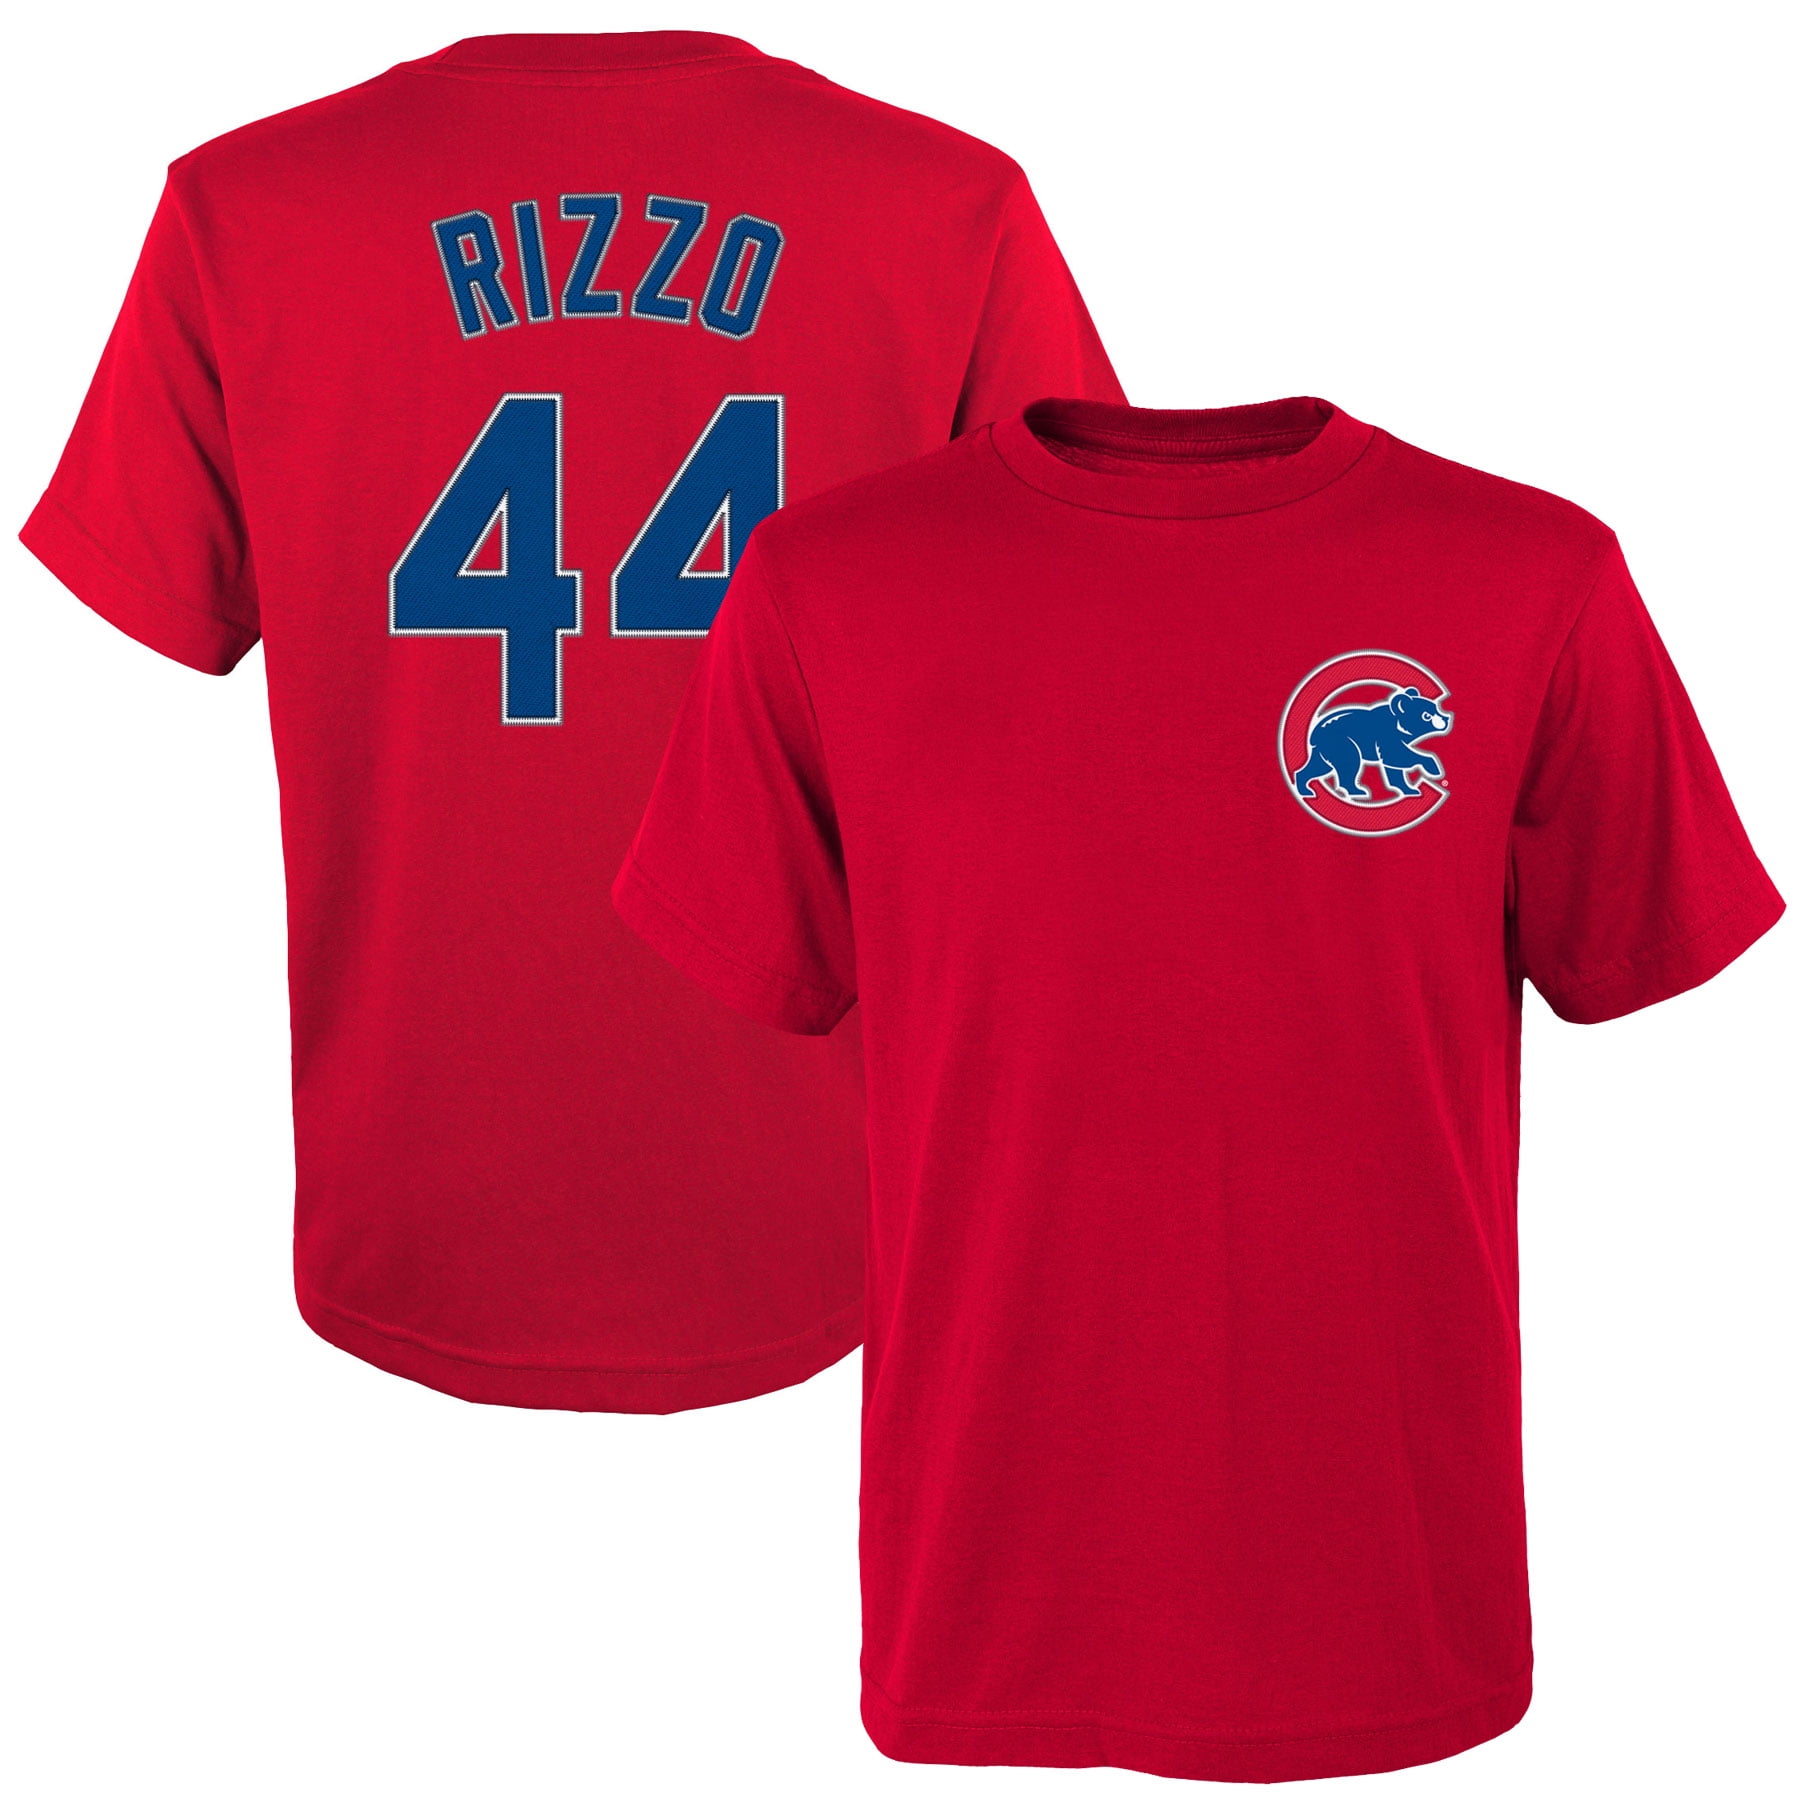 anthony rizzo youth shirt